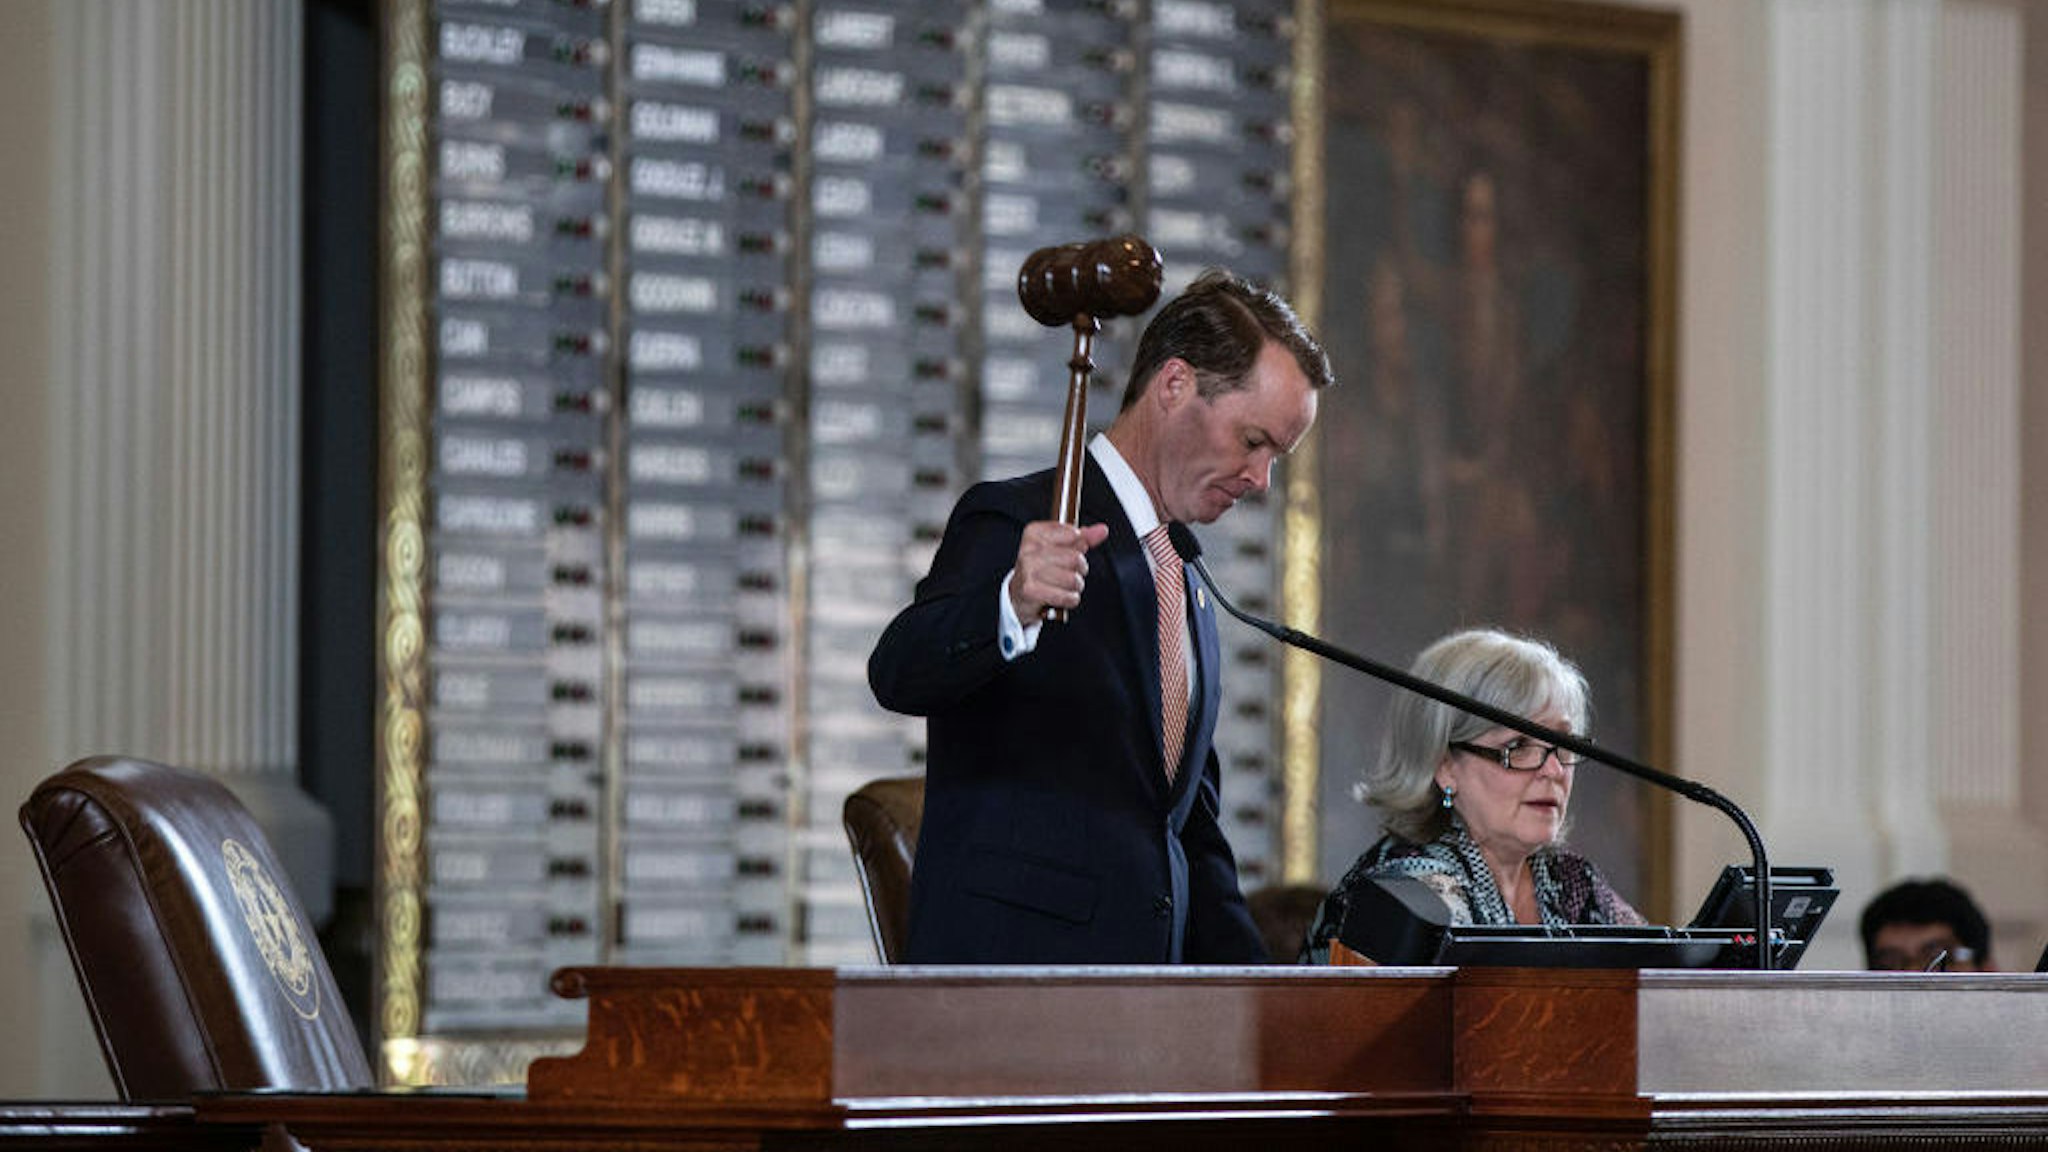 AUSTIN, TX - JULY 08: Texas Speaker of the House Dade Phelan, R-Beaumont, gavels in the 87th Legislature's special session in the House chamber at the State Capitol on July 8, 2021 in Austin, Texas. Republican Gov. Greg Abbott called the legislature into a special session, asking lawmakers to prioritize his agenda items that include overhauling the states voting laws, bail reform, border security, social media censorship, and critical race theory. (Photo by Tamir Kalifa/Getty Images)